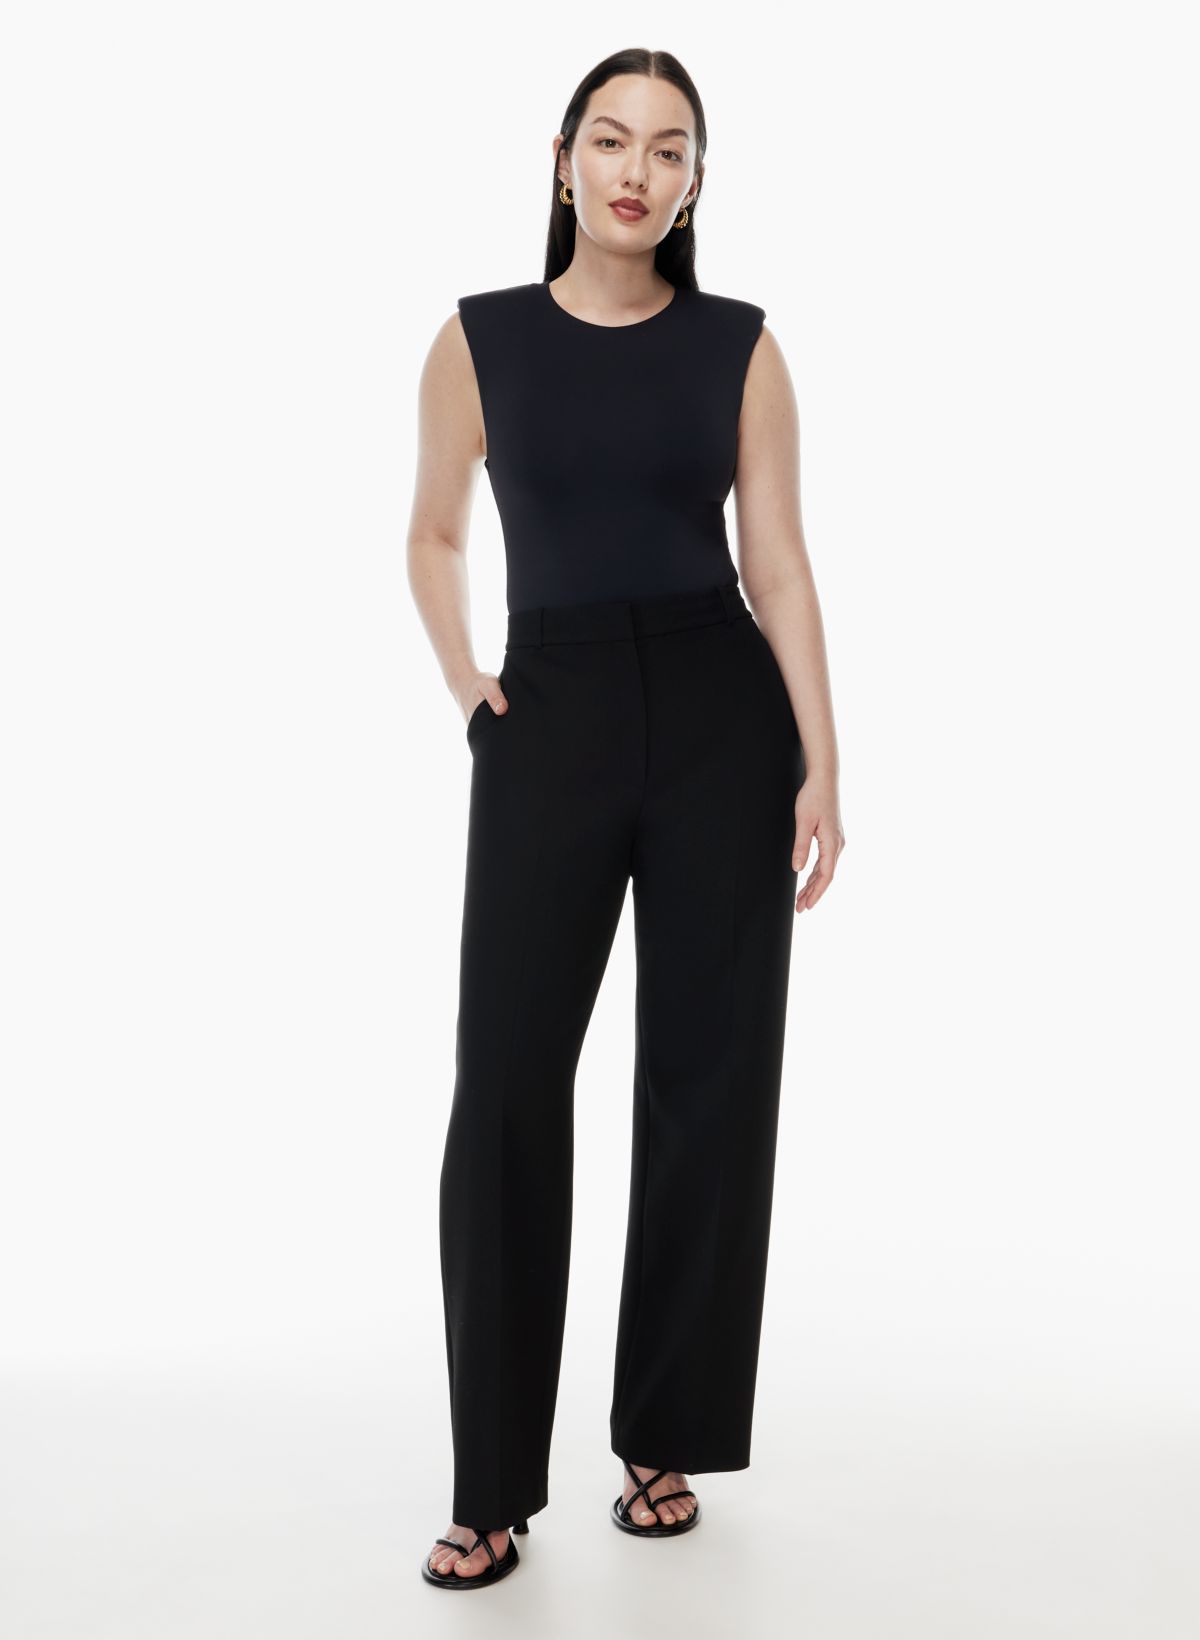 Aritzia - SOLD OUT NWT Black Halter Look Flare Jumpsuit Wilfred Free - SZ  Small